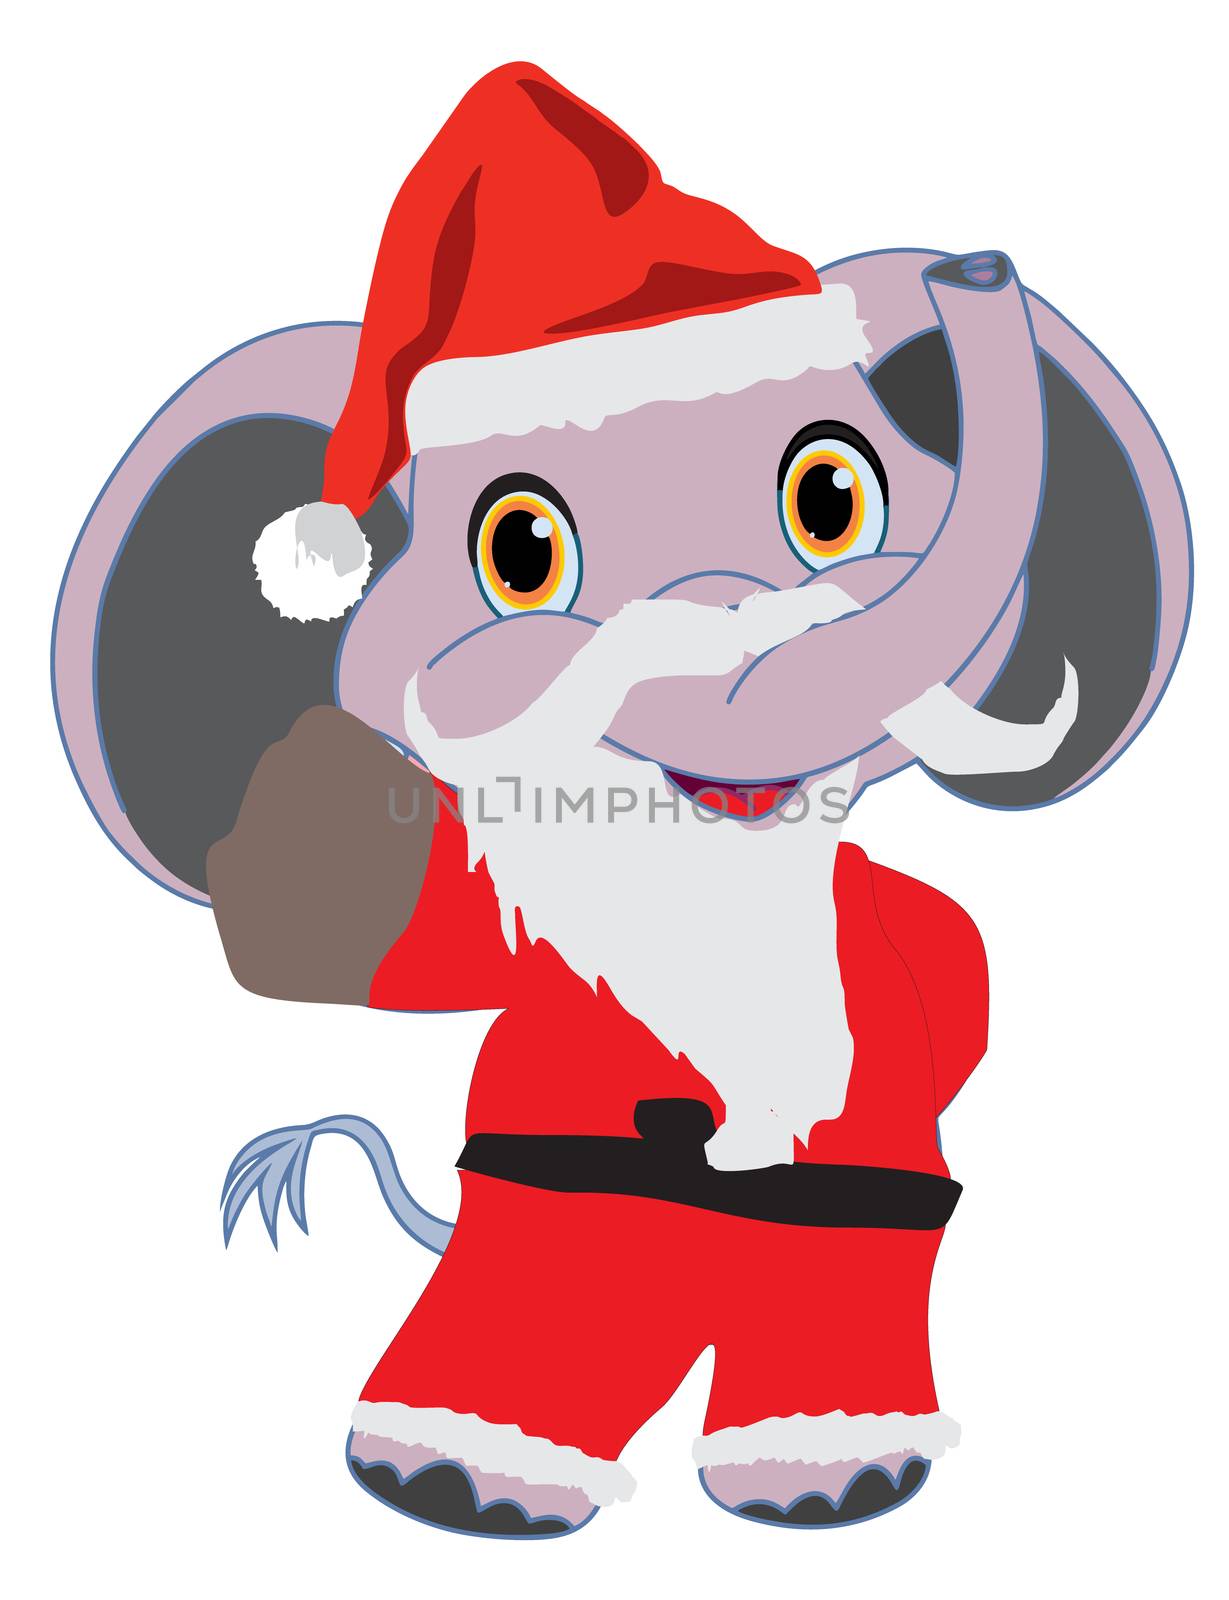 elephant santa is wearing red clothes